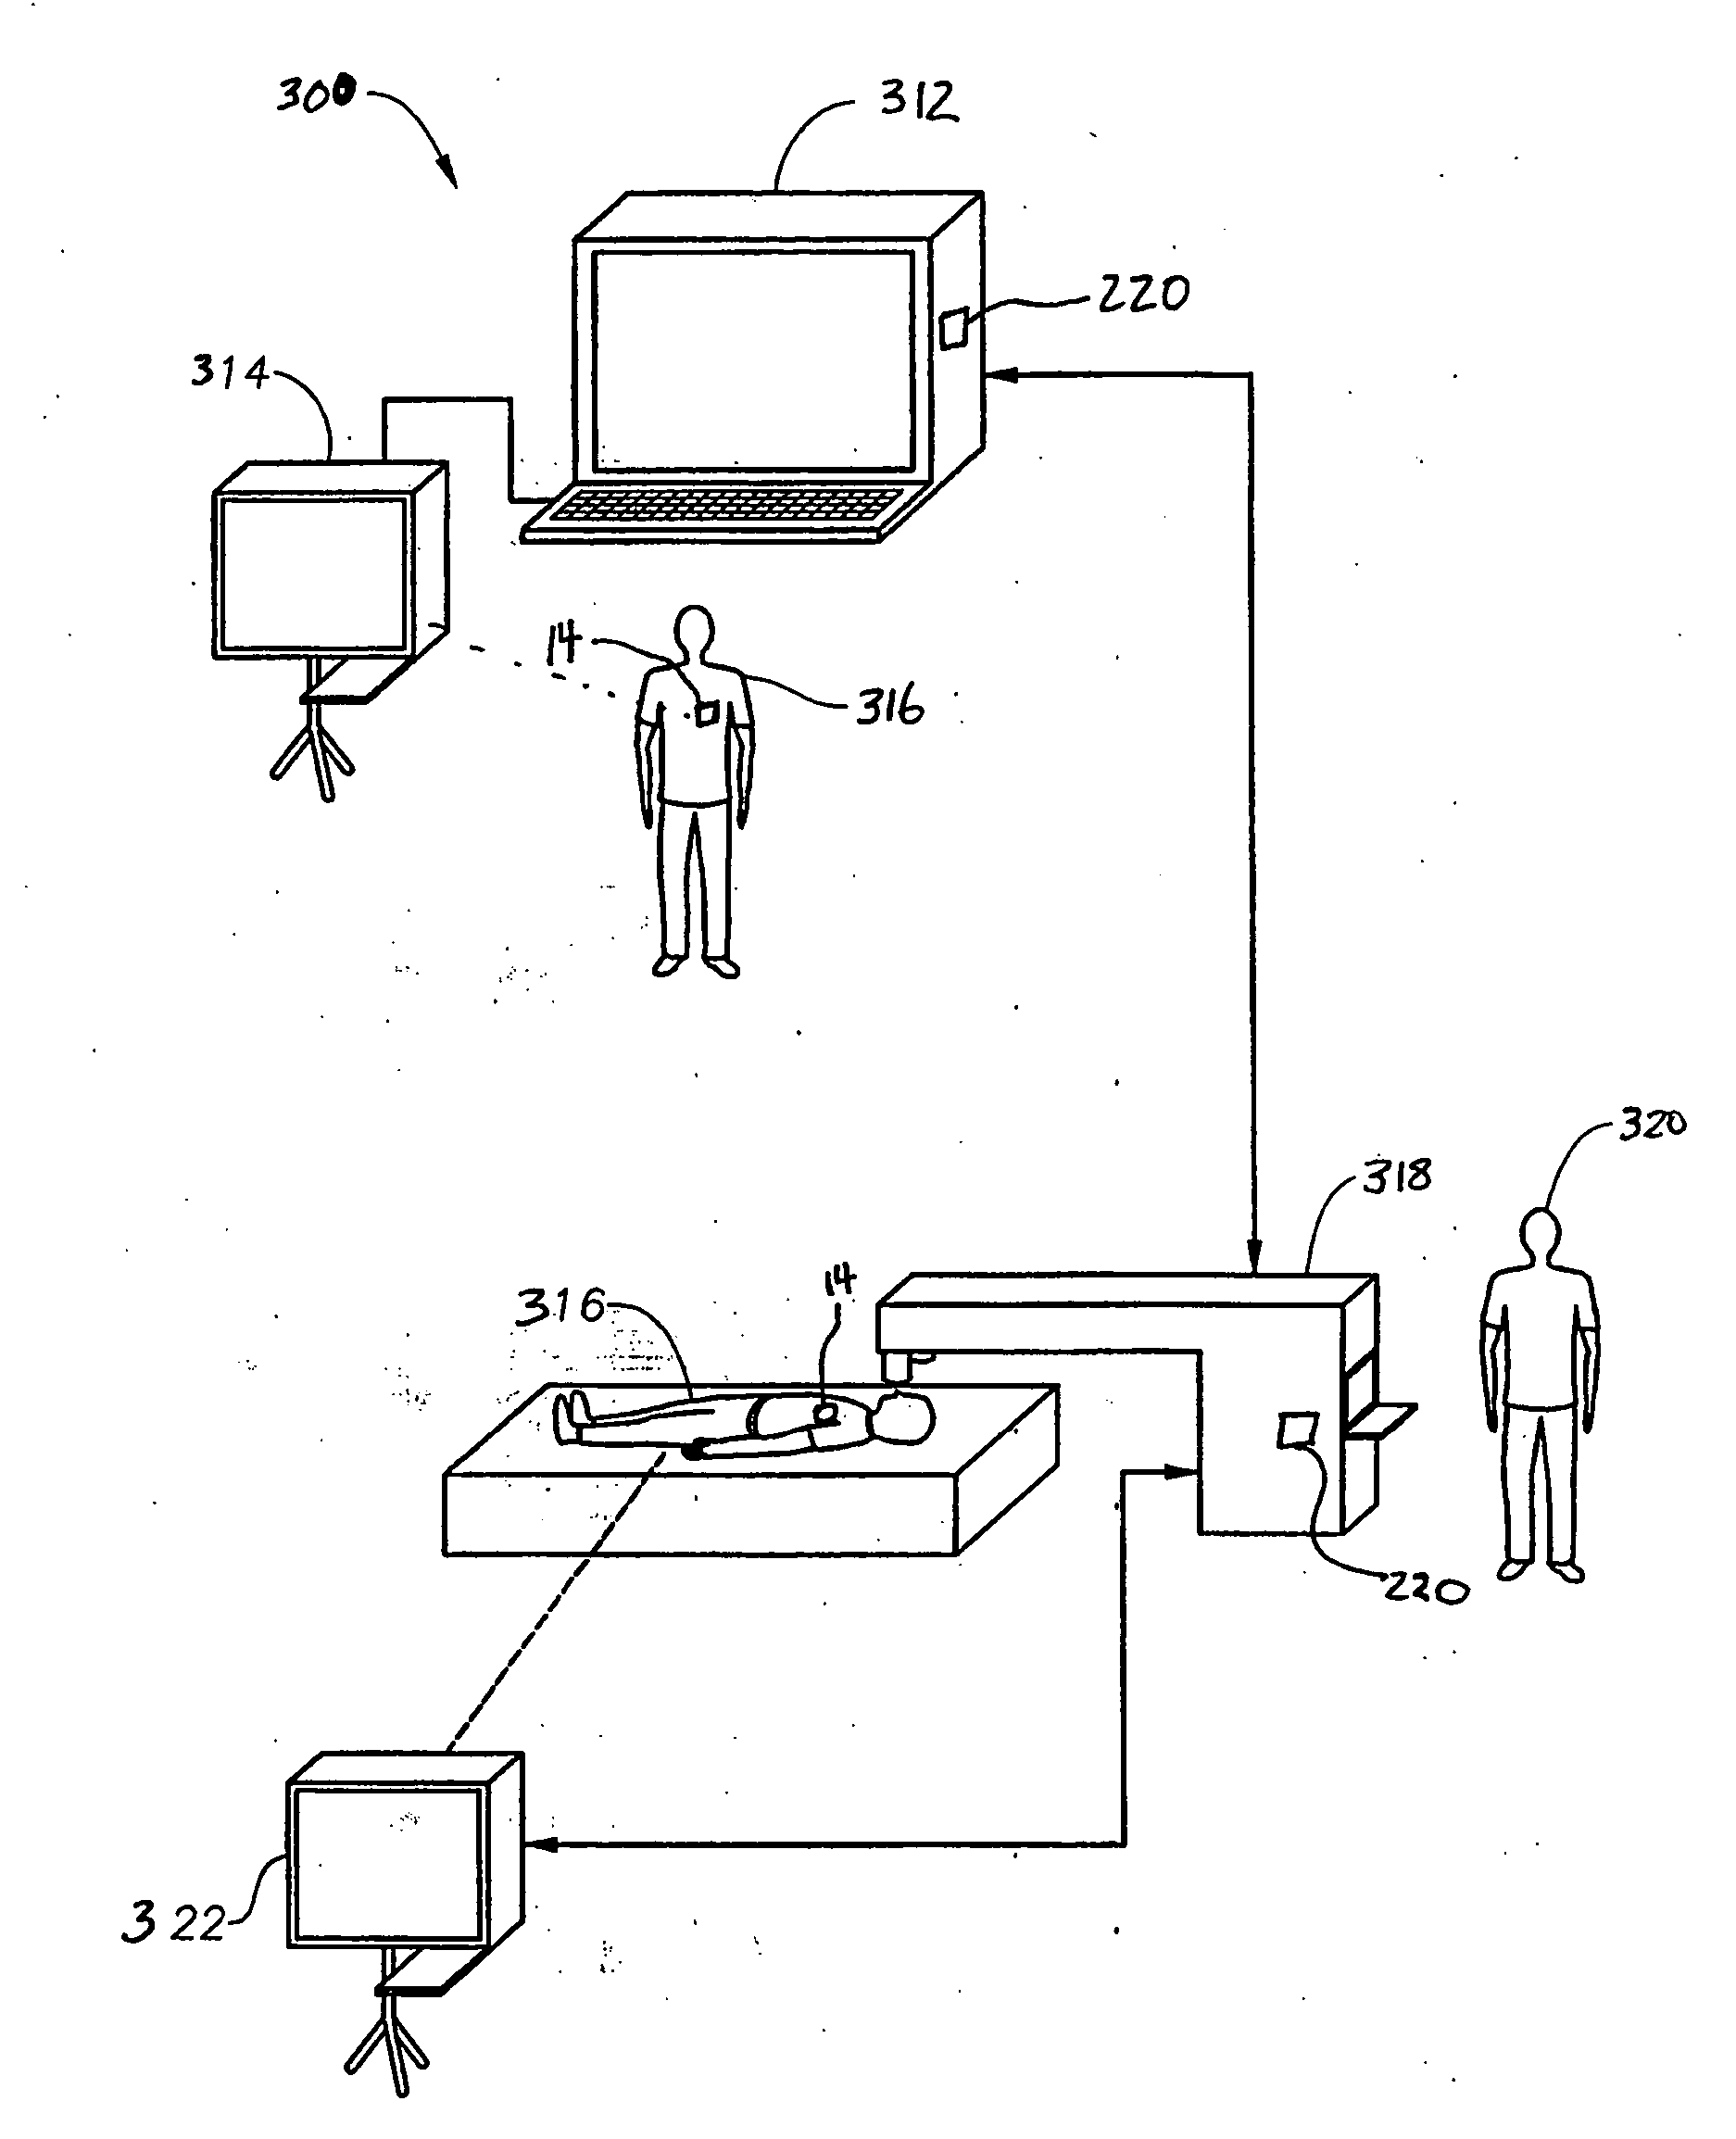 Method and system for configuring and data populating a surgical device